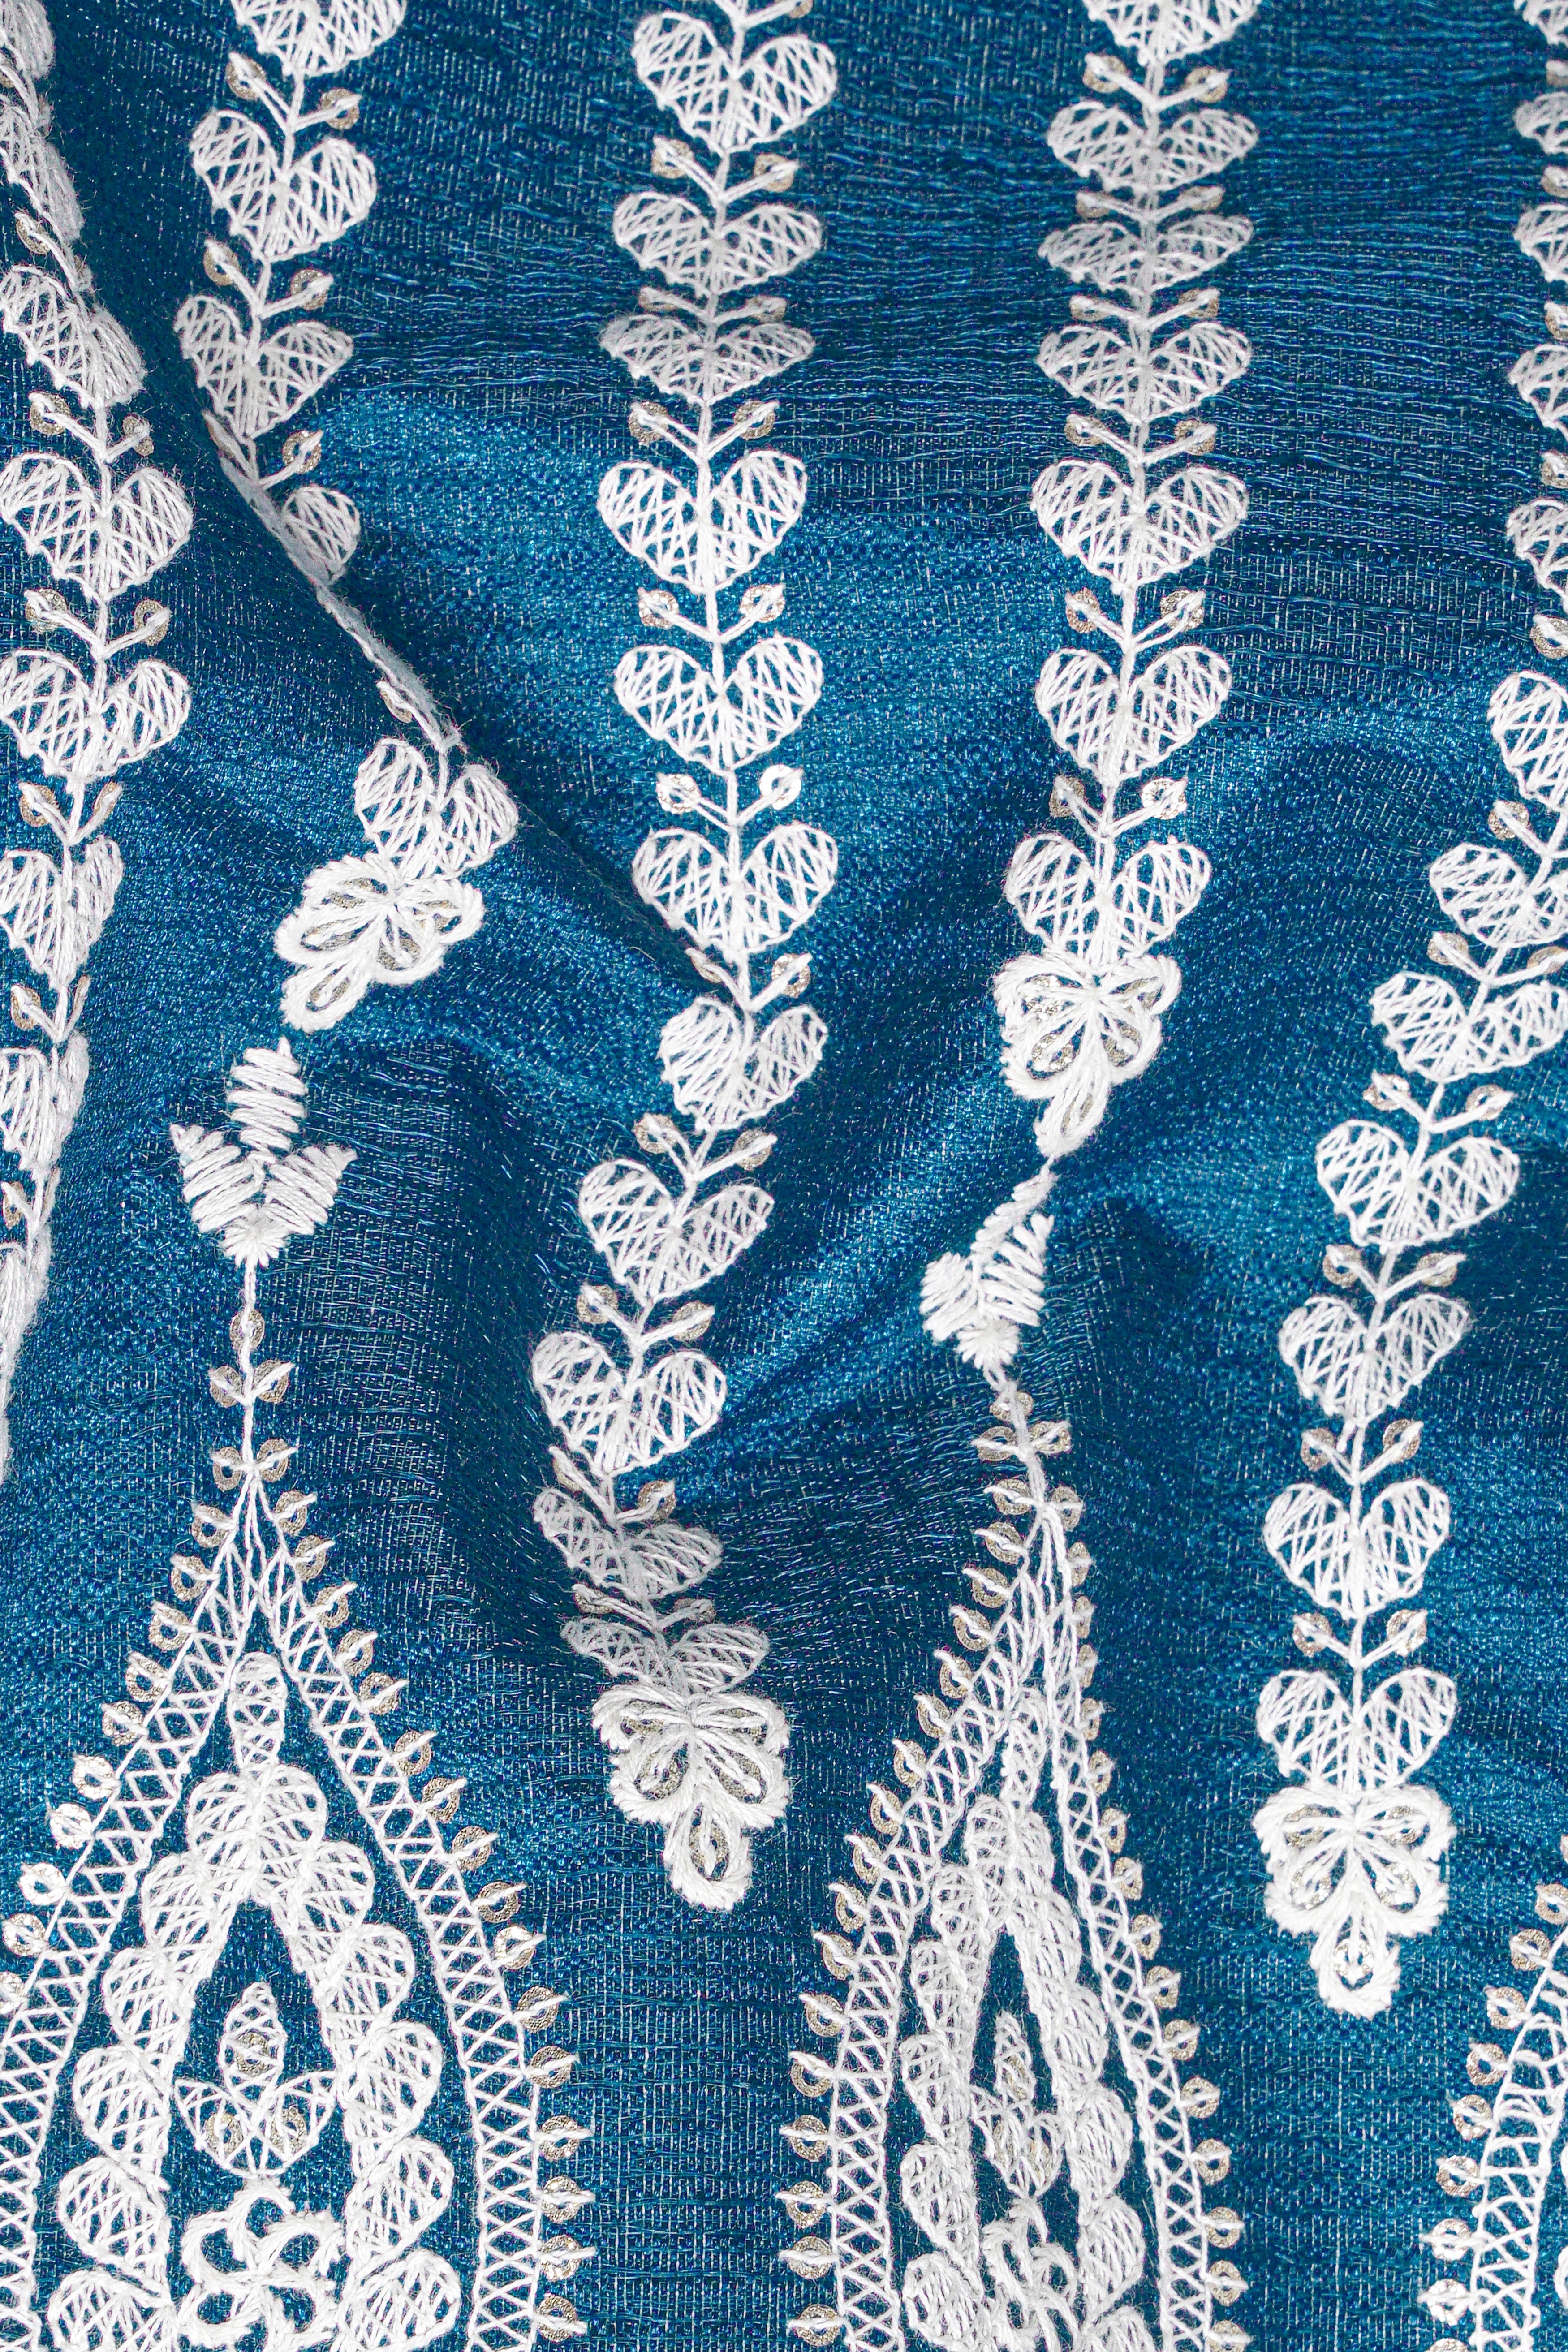 Cerulean Blue and White Thread Embroidered Nehru Jacket WC3518-36,  WC3518-38,  WC3518-40,  WC3518-42,  WC3518-44,  WC3518-46,  WC3518-48,  WC3518-50,  WC3518-52,  WC3518-54,  WC3518-56,  WC3518-58,  WC3518-60